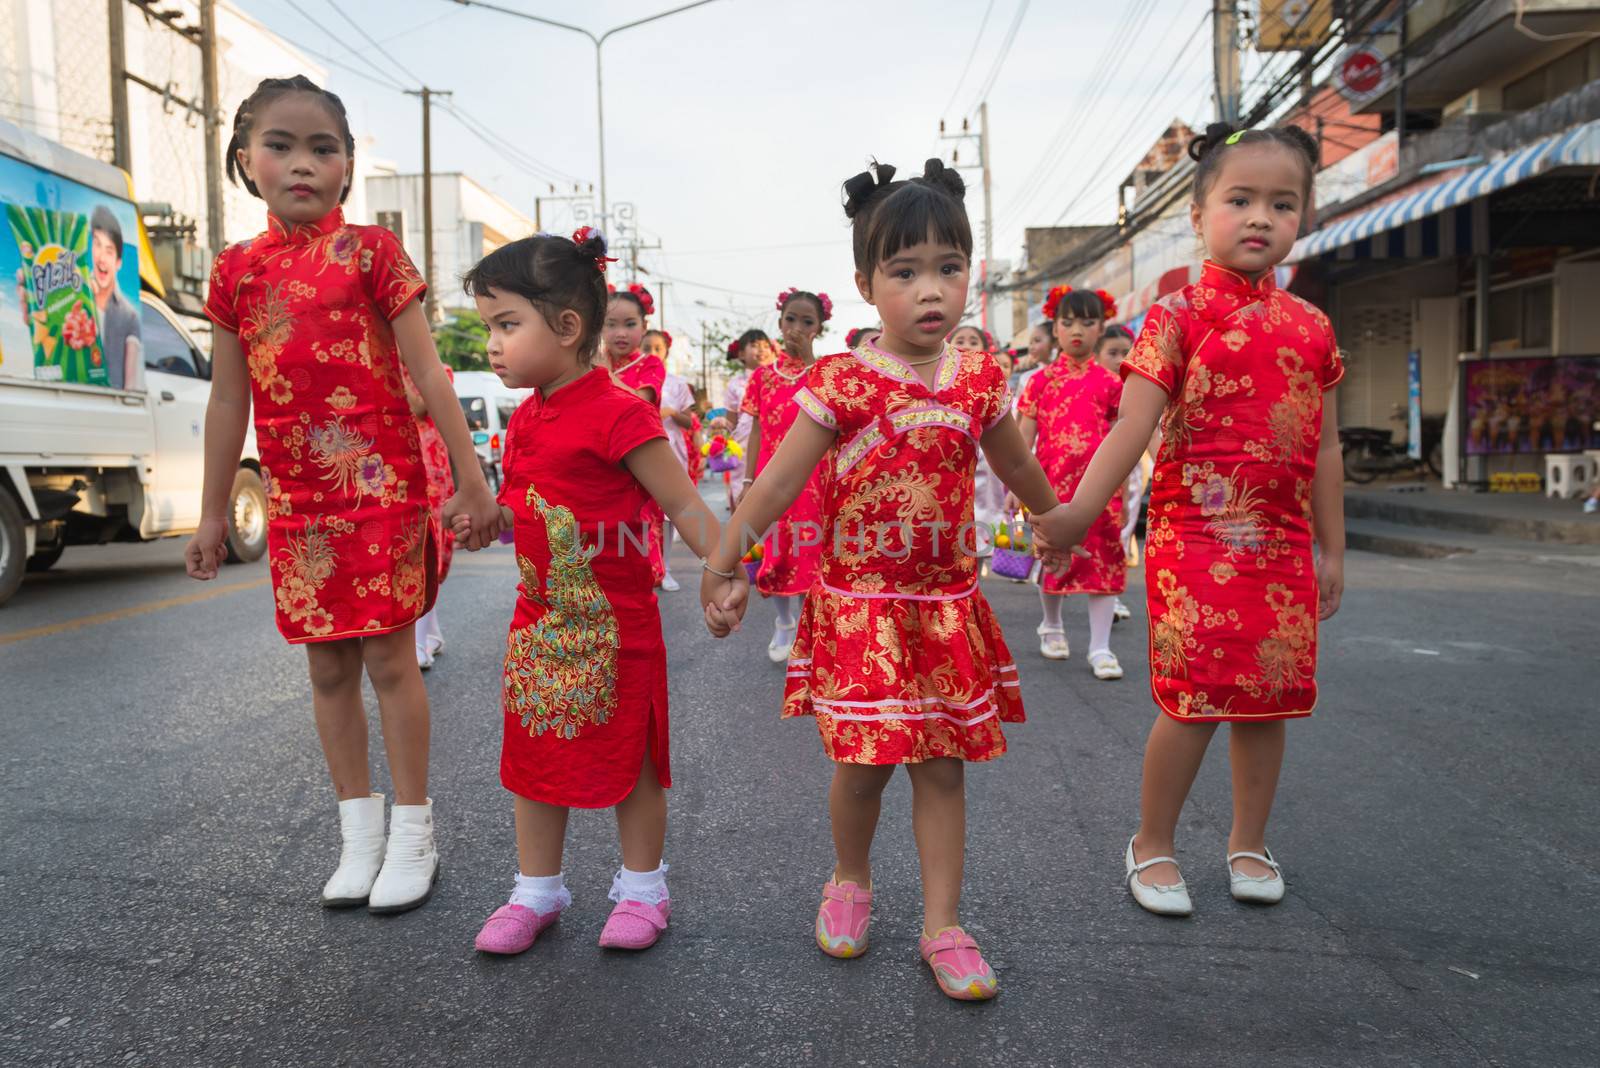 PHUKET, THAILAND - 07 FEB 2014: Small Phuket town residents take part in procession parade of annual old Phuket town festival. 